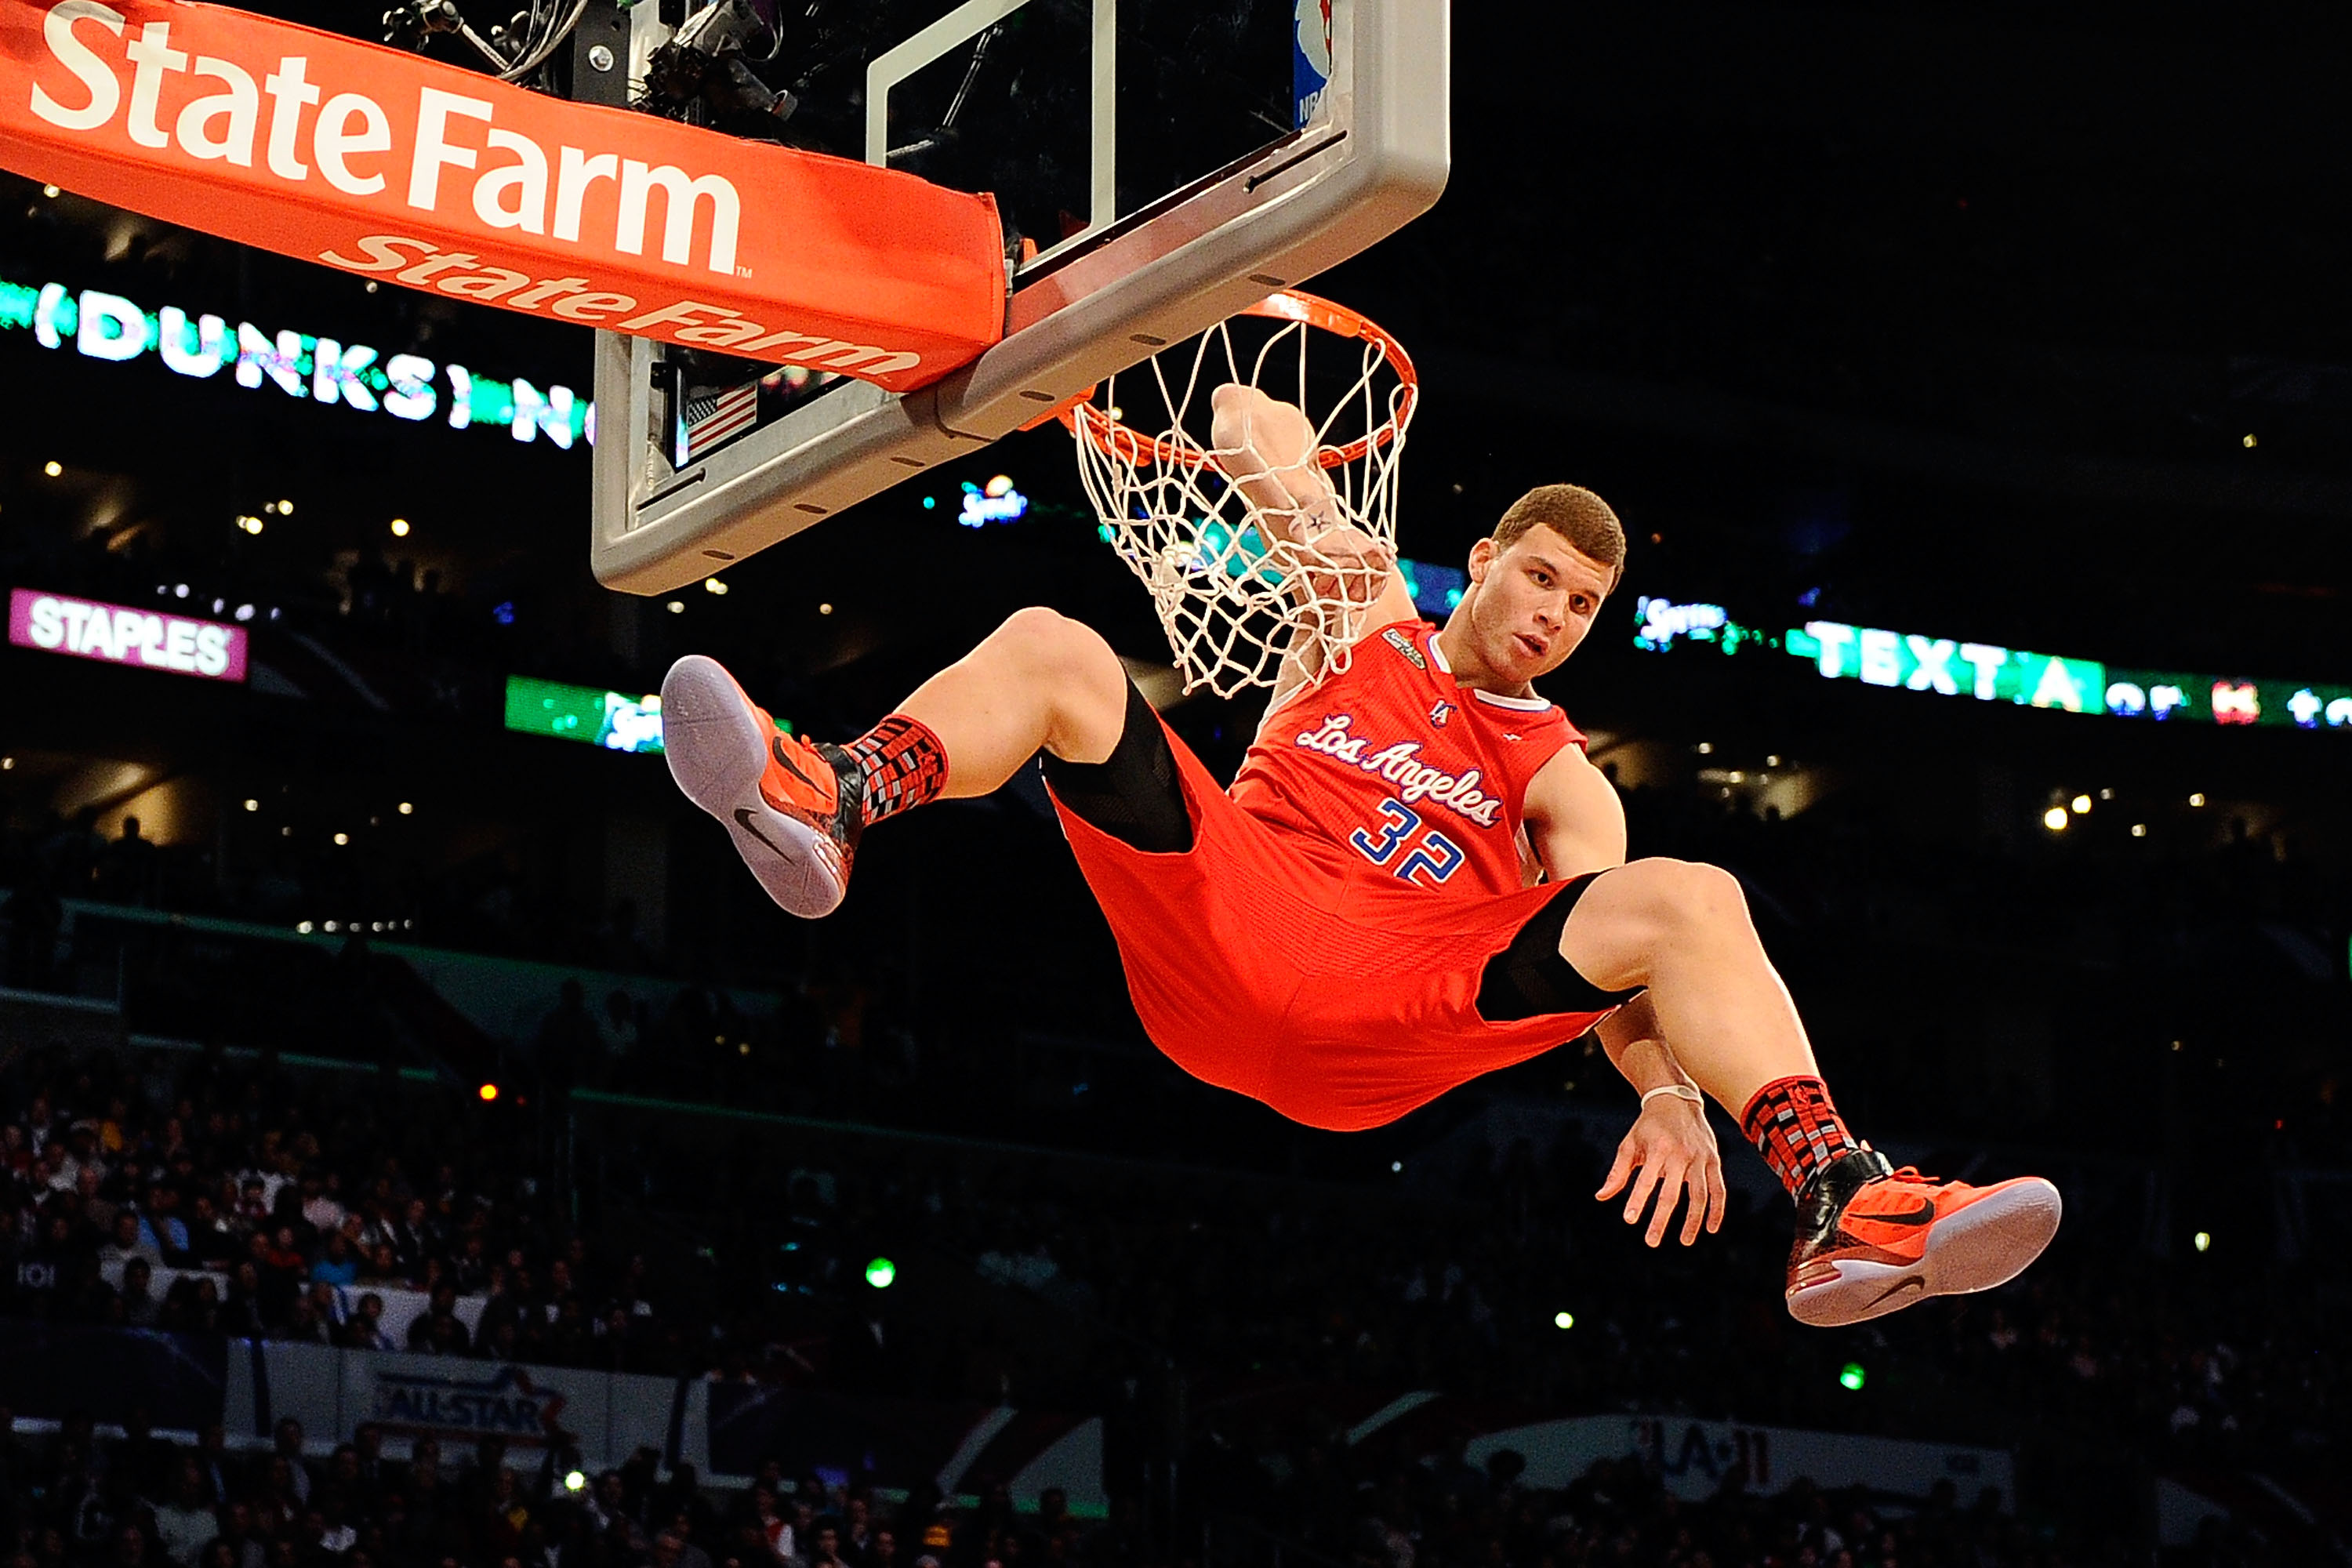 2011 Nba Slam Dunk Contest Power Ranking All 12 Dunks With Video